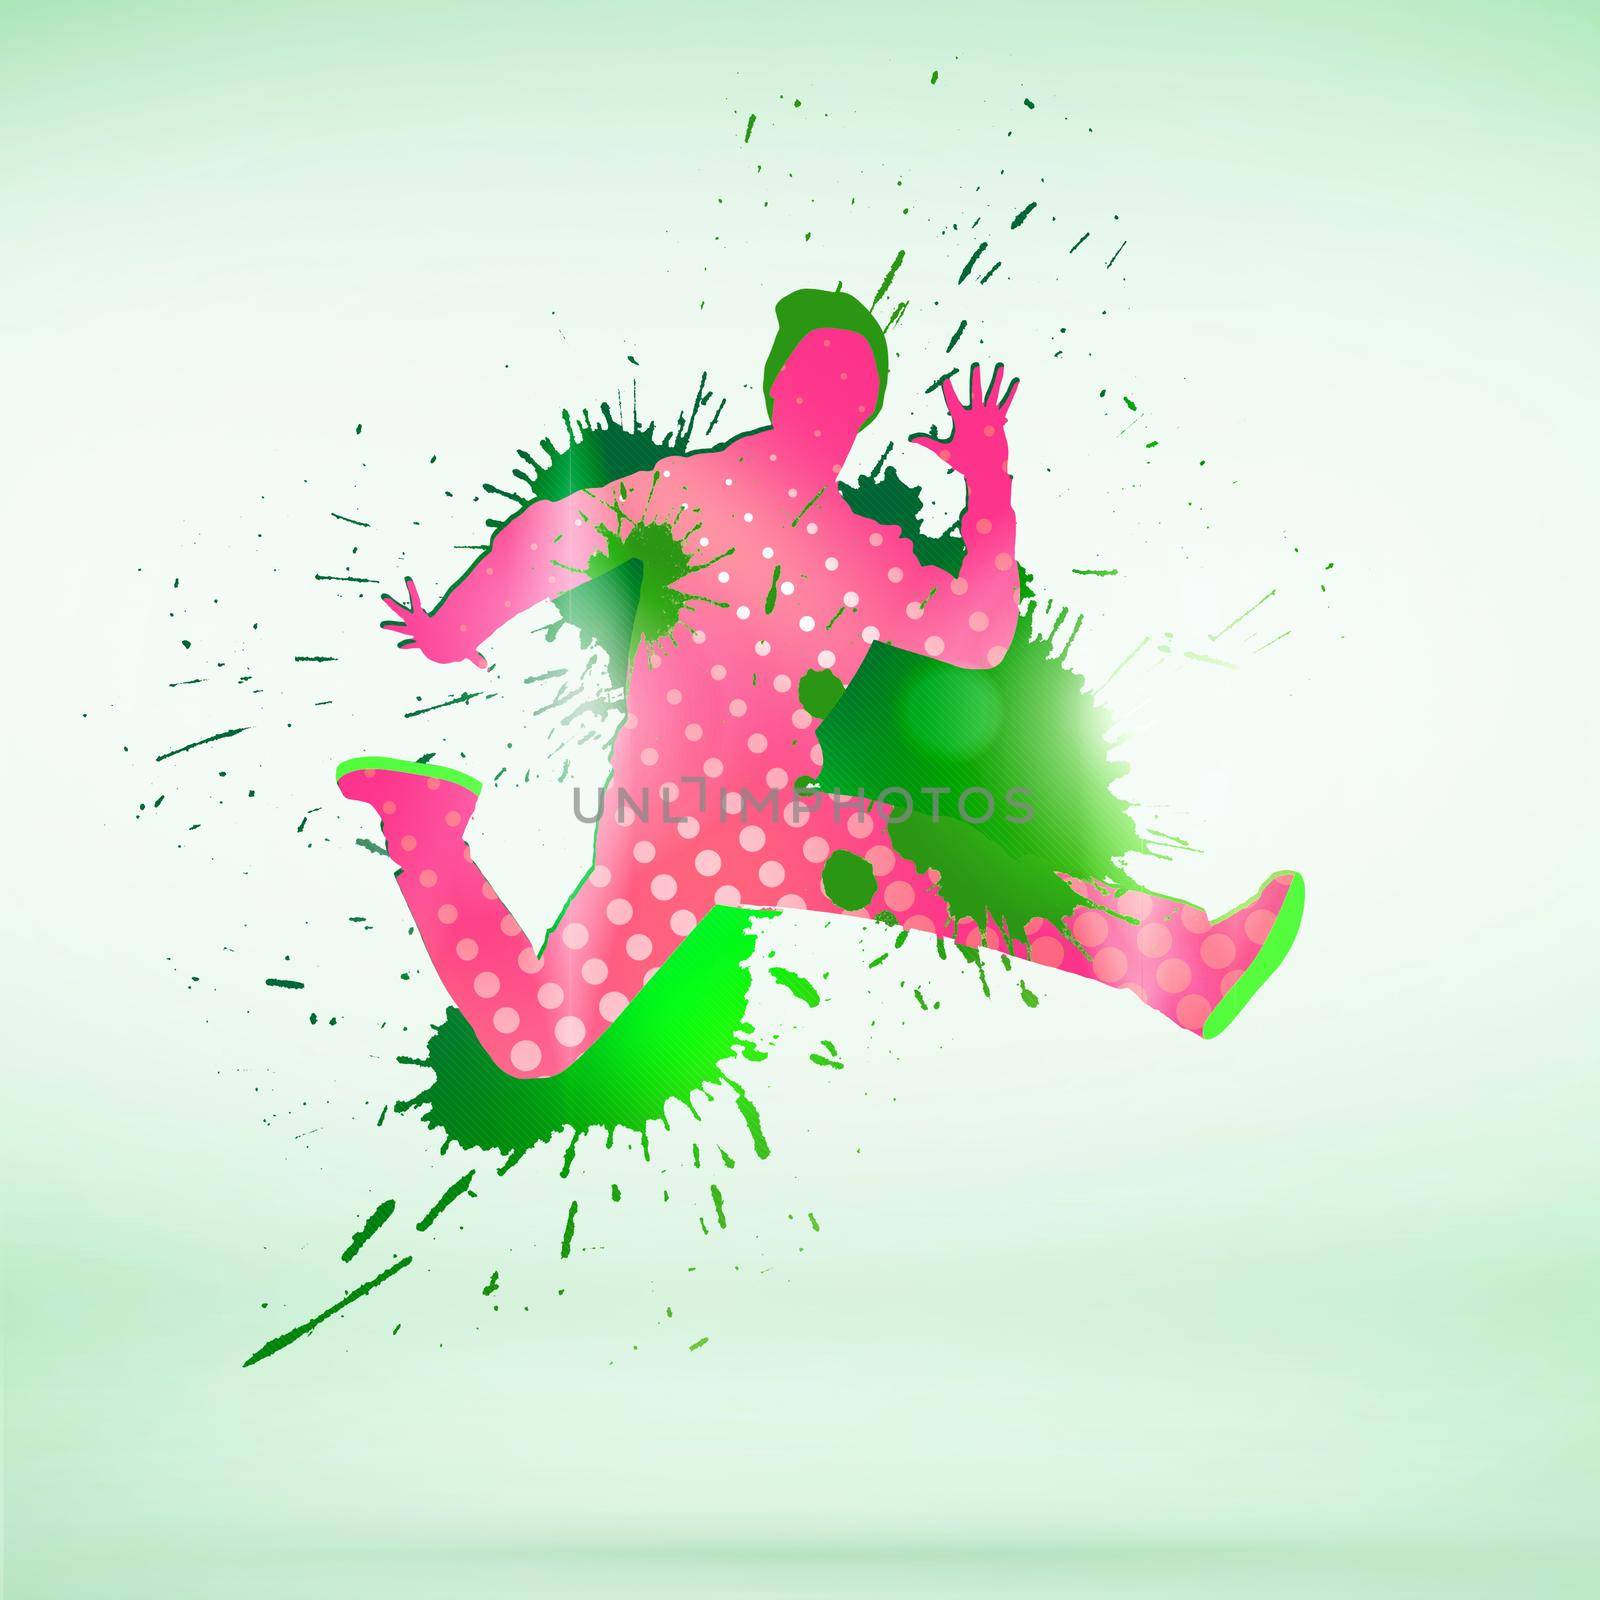 Image with colorful silhouette of dancer on white background